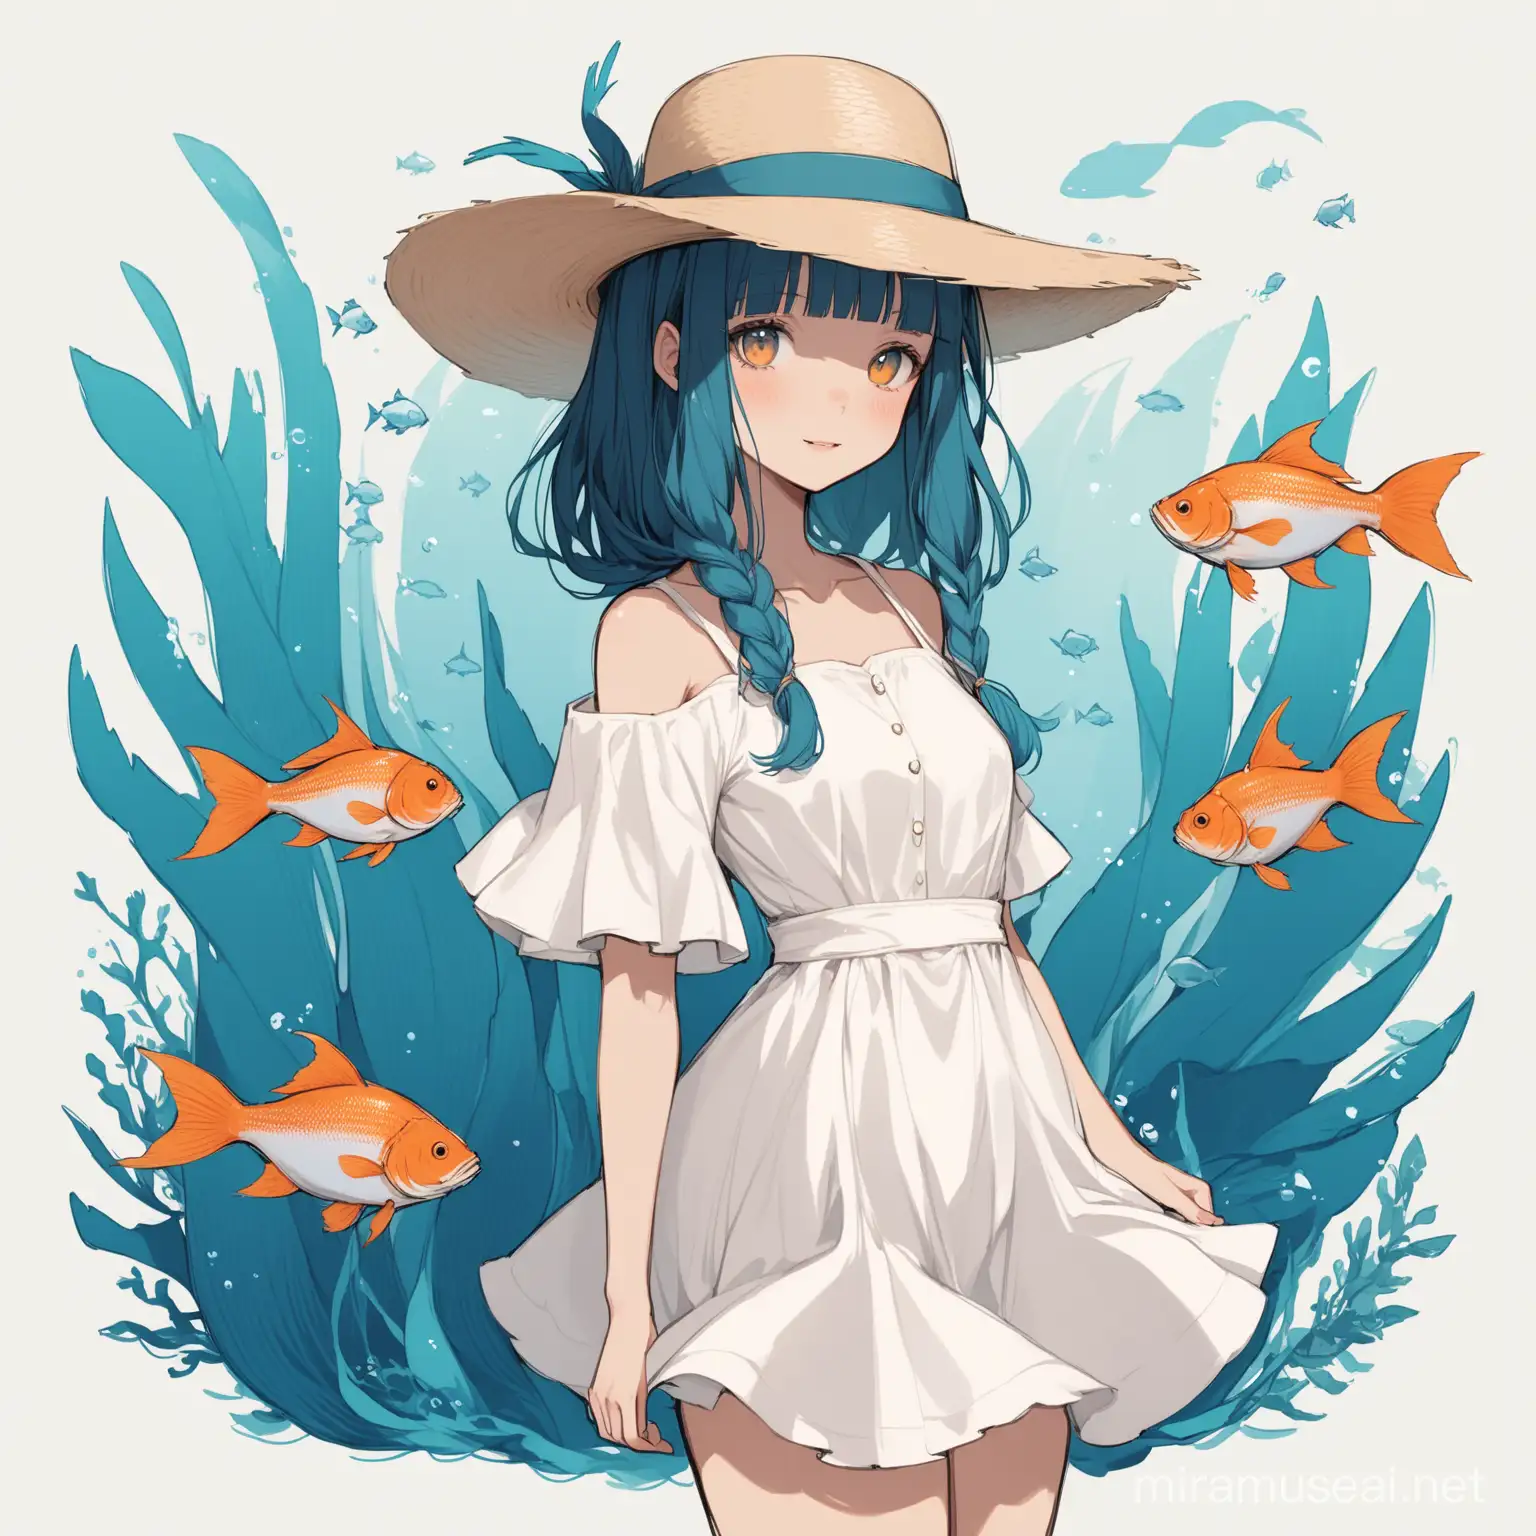 Humanoid girl with fish gills and a panama hat and a dress
